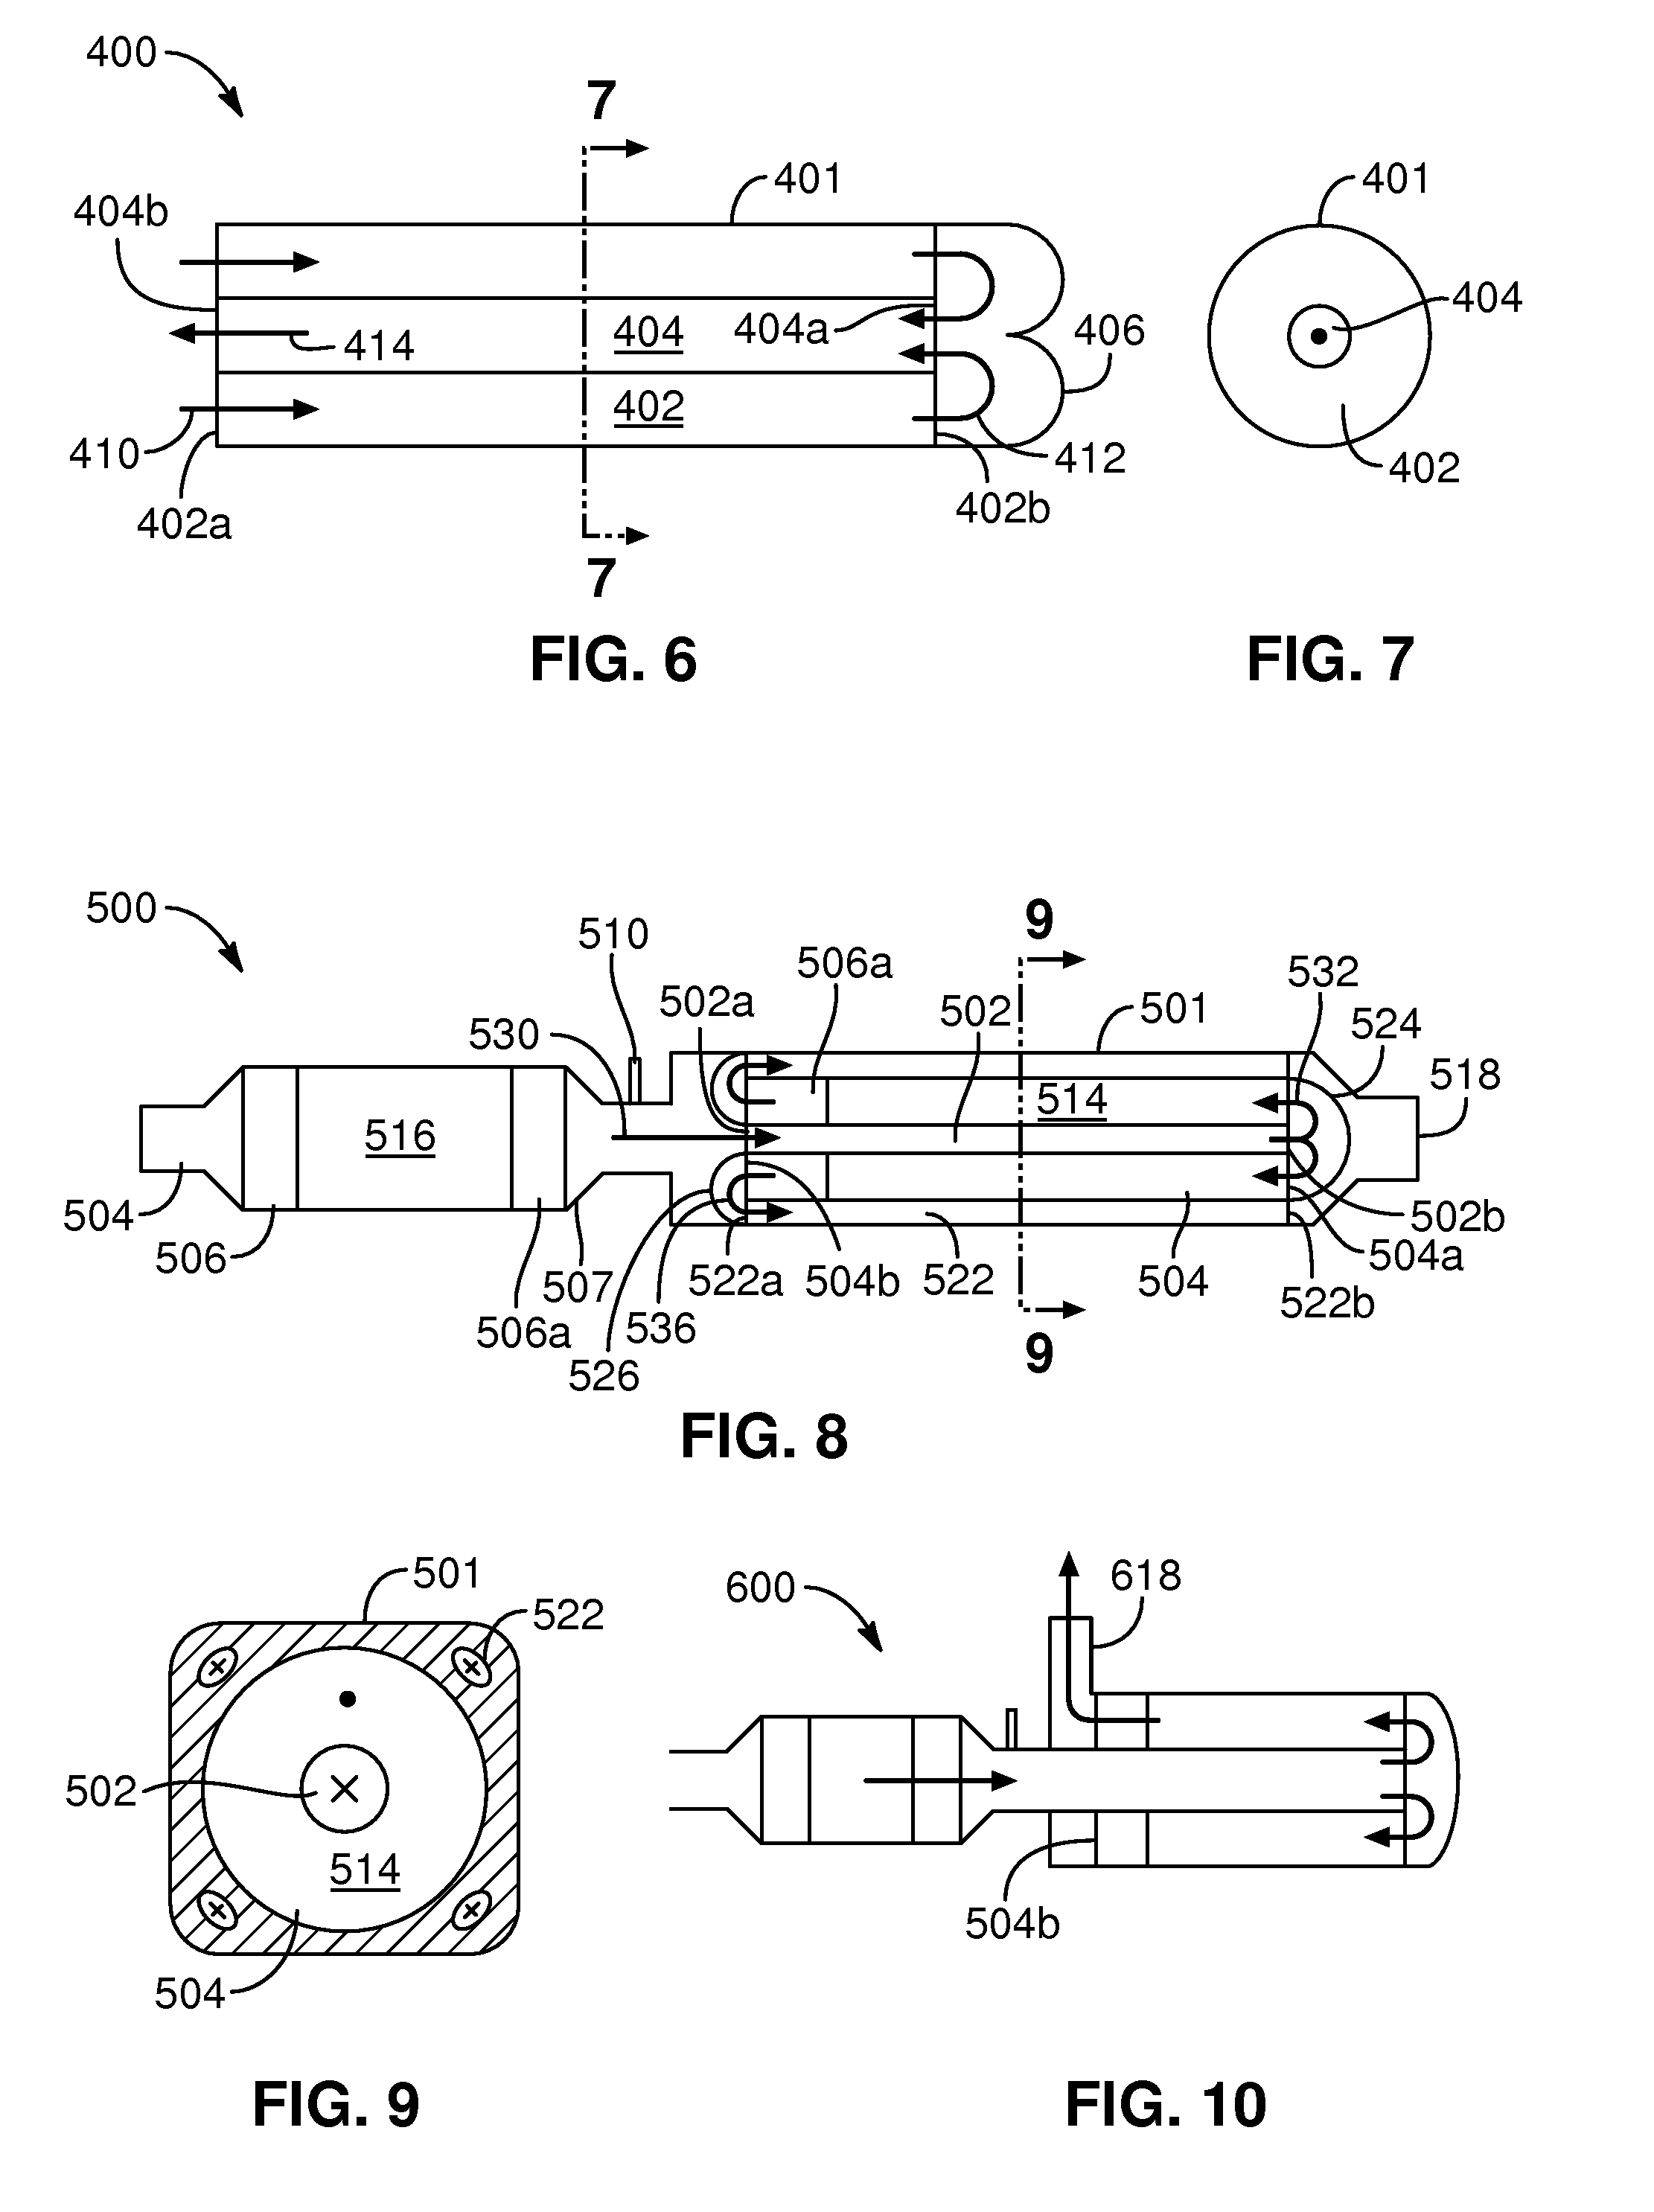 Exhaust treatment packaging apparatus, system, and method